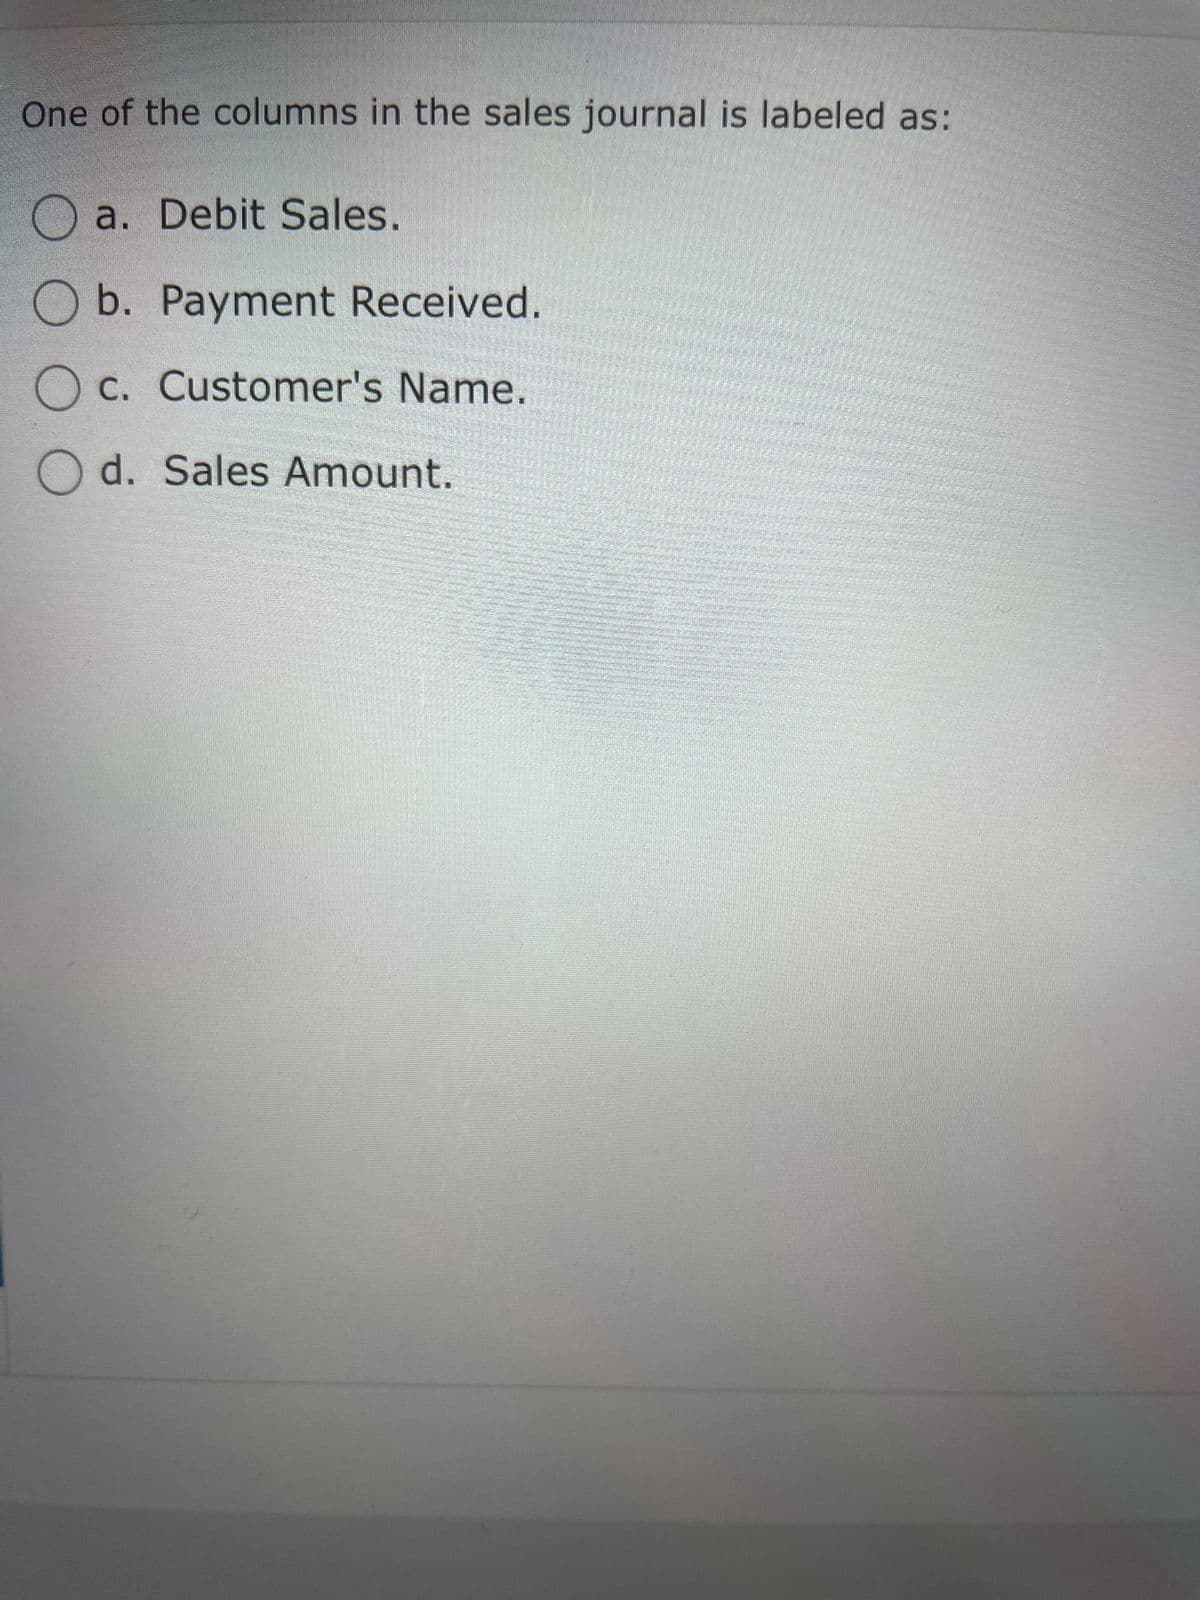 One of the columns in the sales journal is labeled as:
Oa. Debit Sales.
O b. Payment Received.
c. Customer's Name.
Od. Sales Amount.